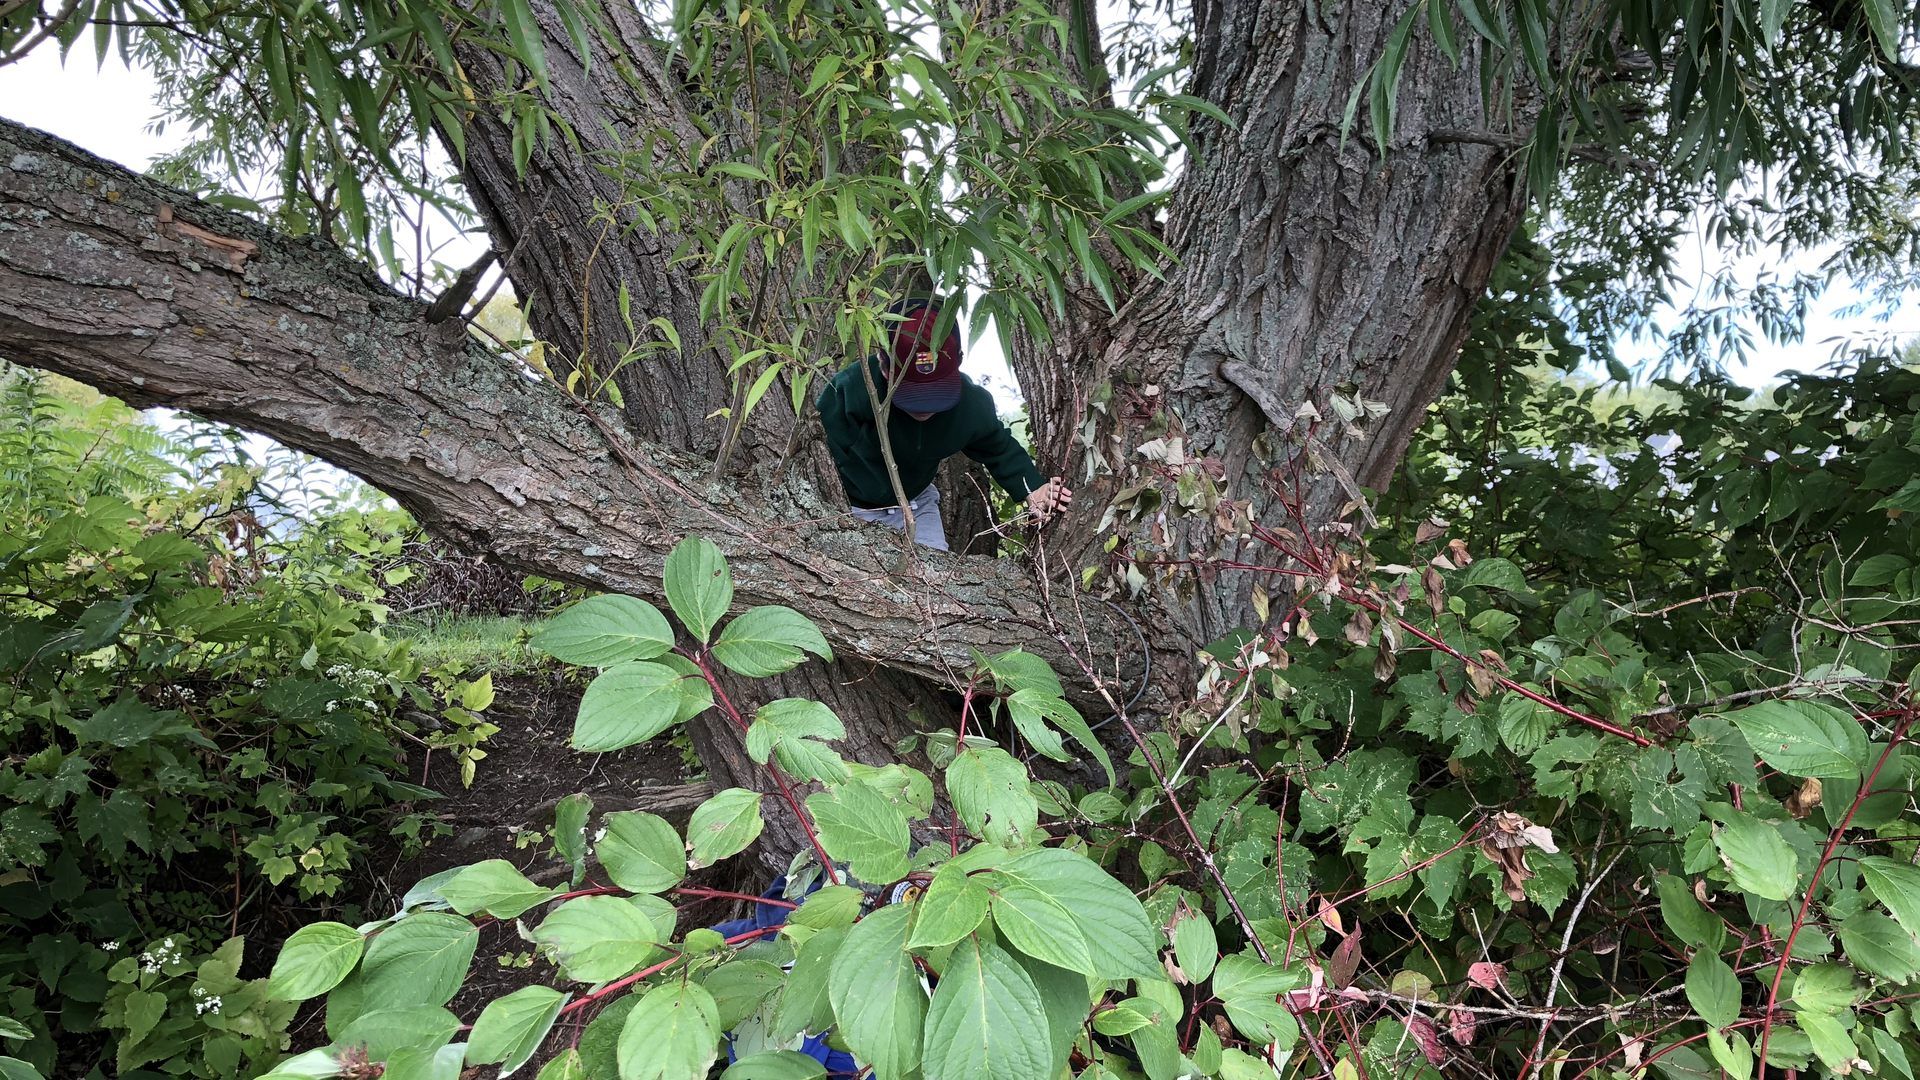 Climbing a tree in search of a geocache